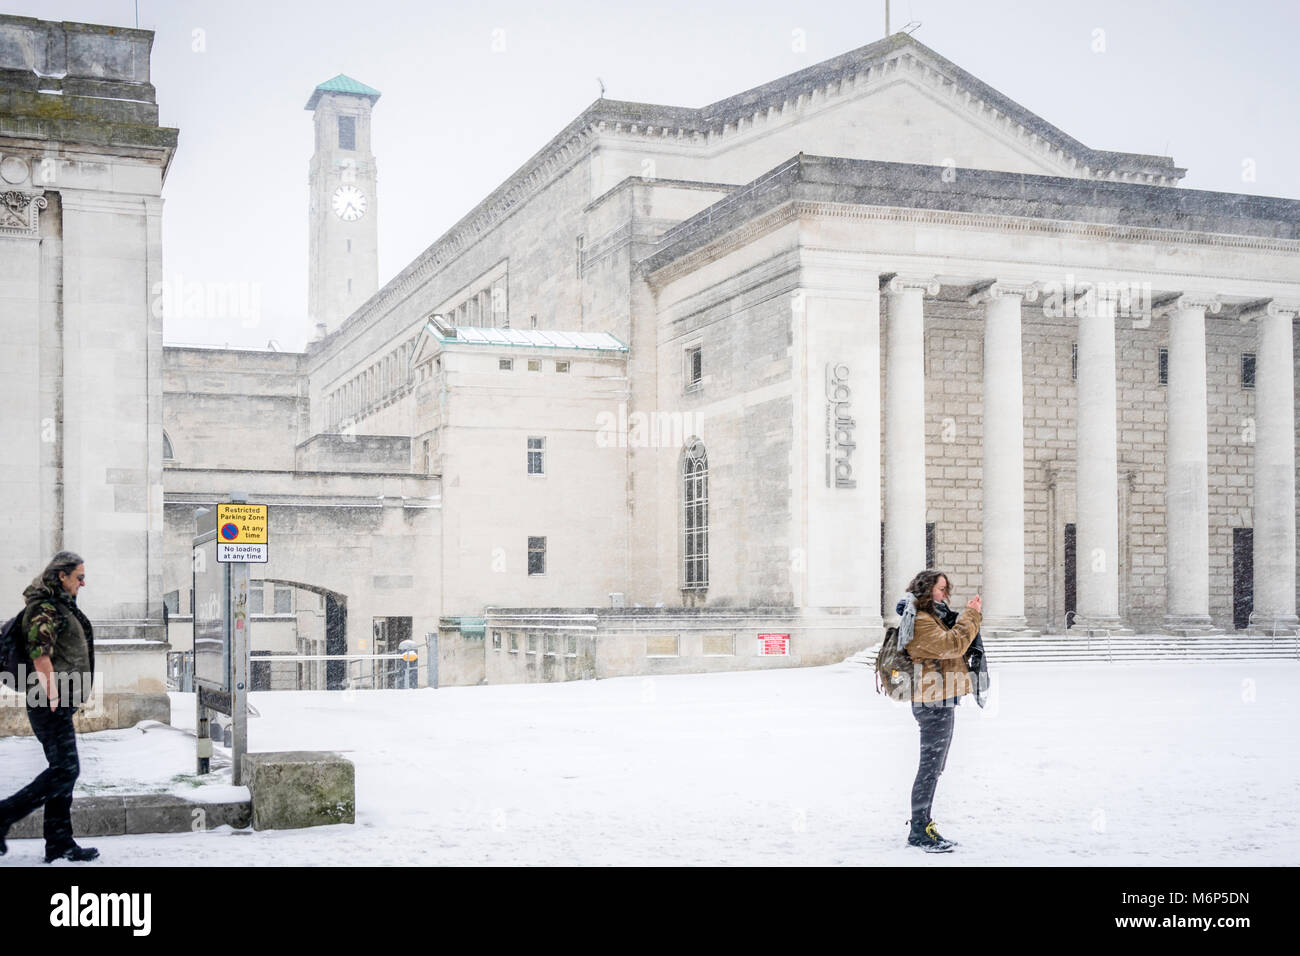 The O2 Guildhall and the Civic Centre Clock Tower in Guildhall Square during winter and heavy snowfall in Southampton, March 2018, England, UK Stock Photo